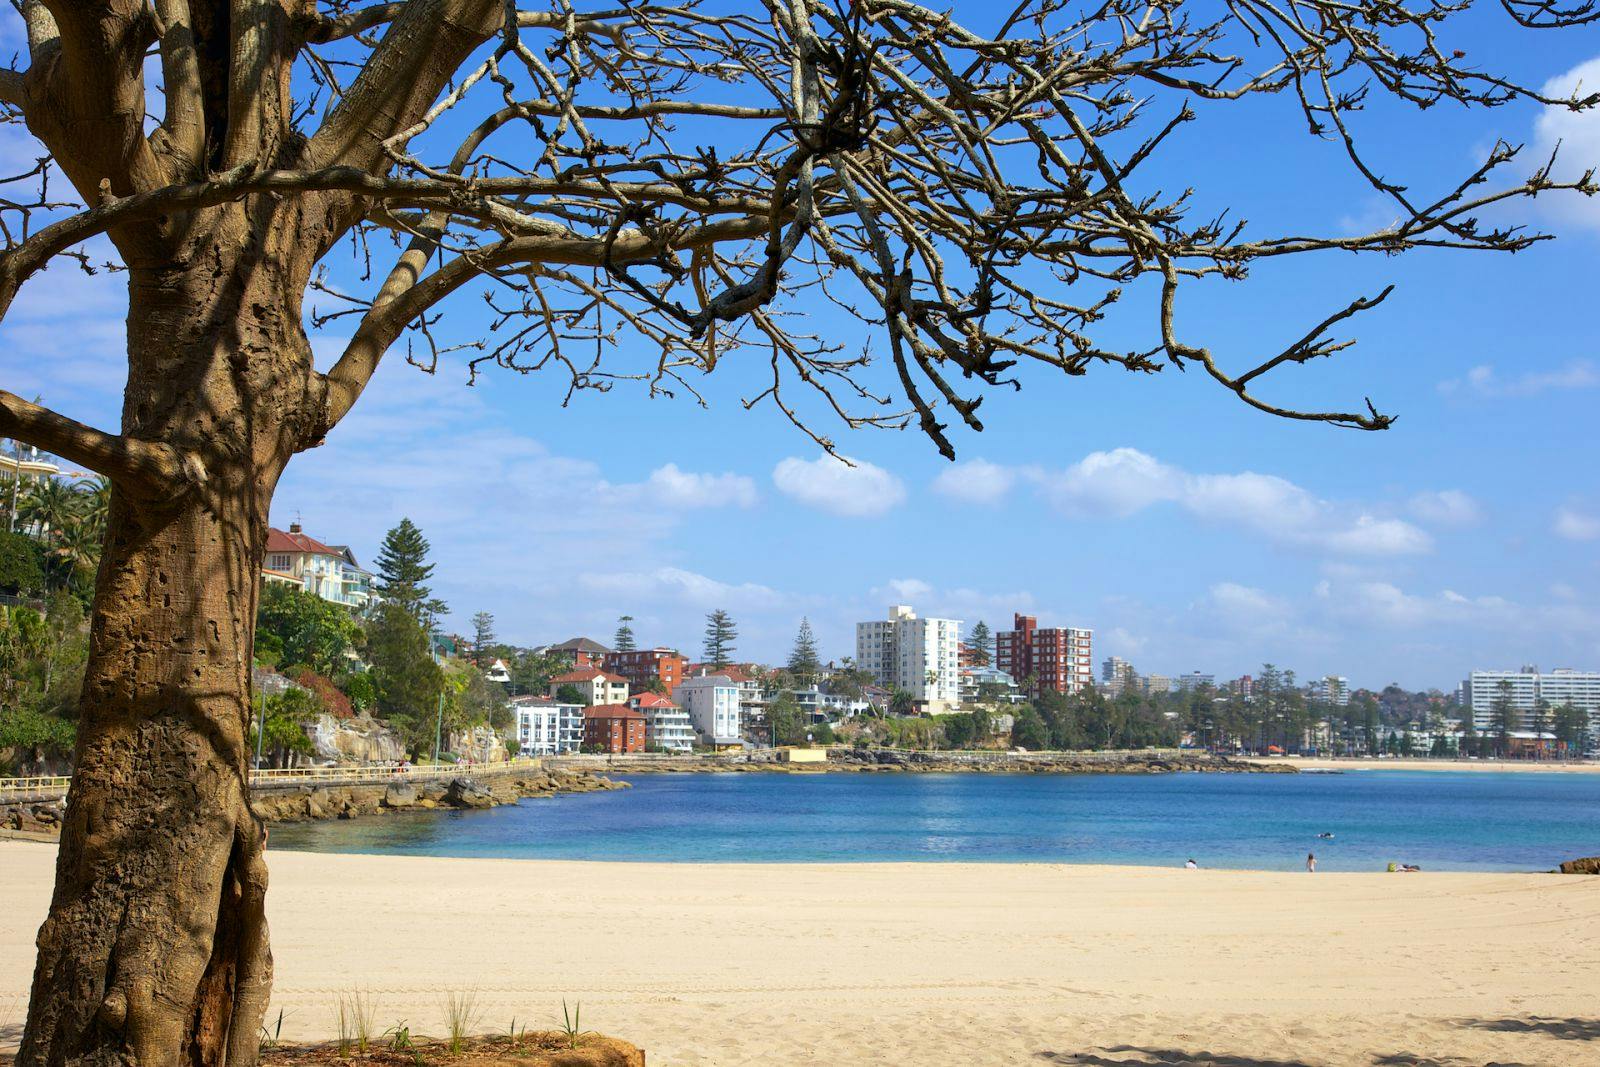 Picture of Manly